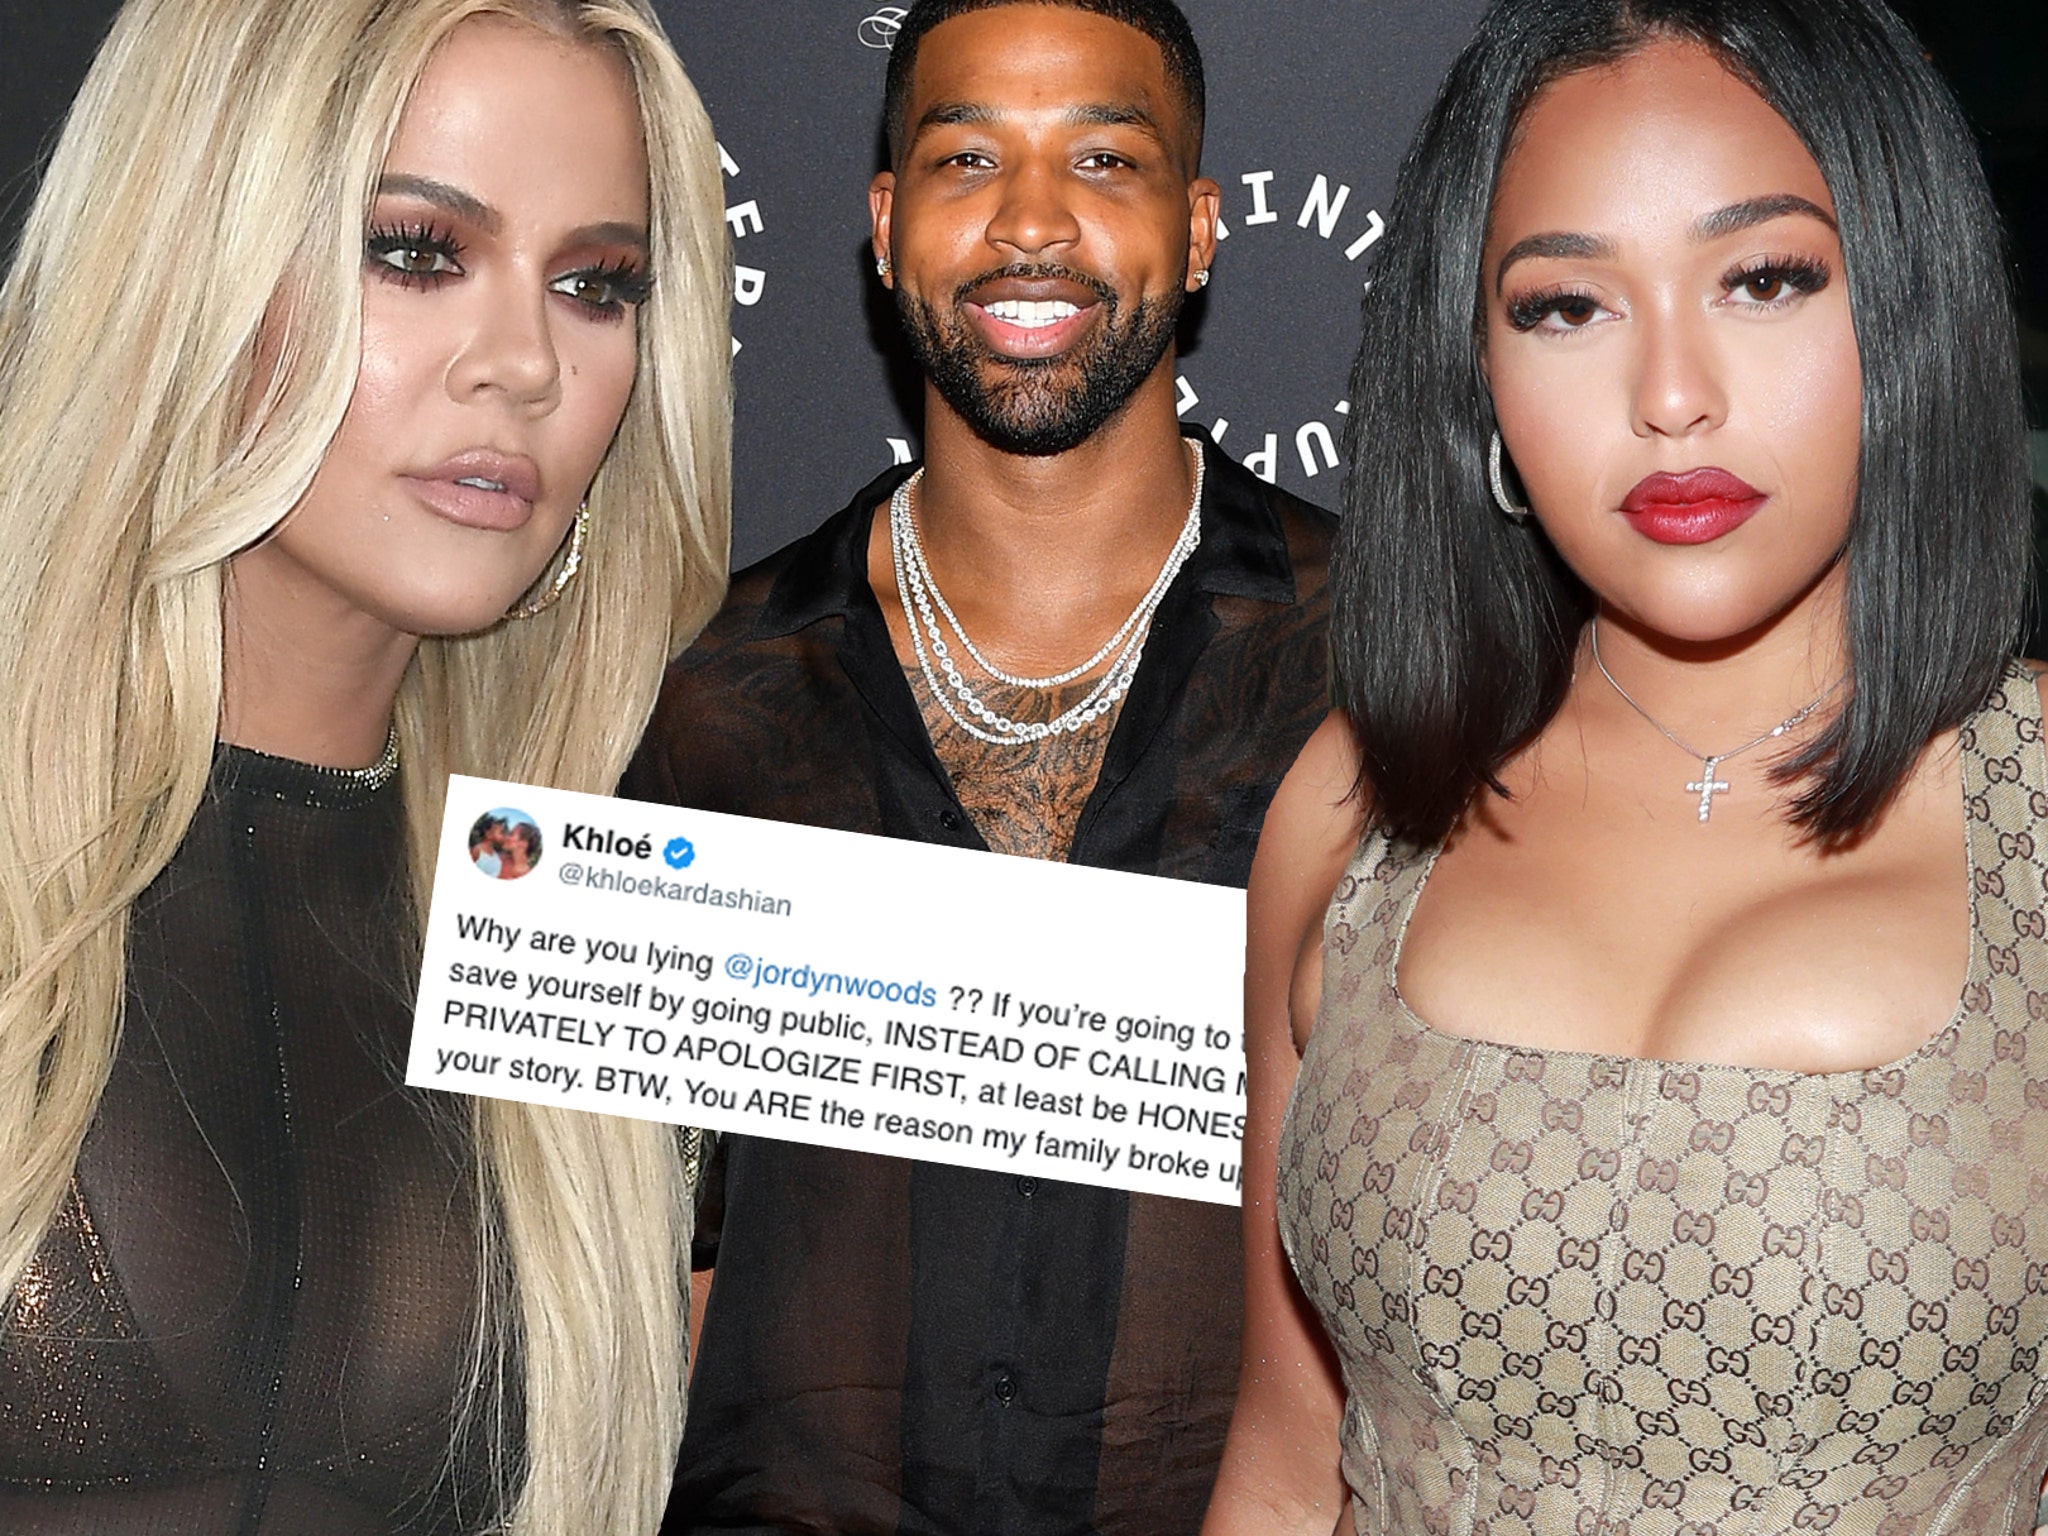 How Jordyn Woods Khloe Kardashian And Tristan Thompson Moved On From 2019 Scandal